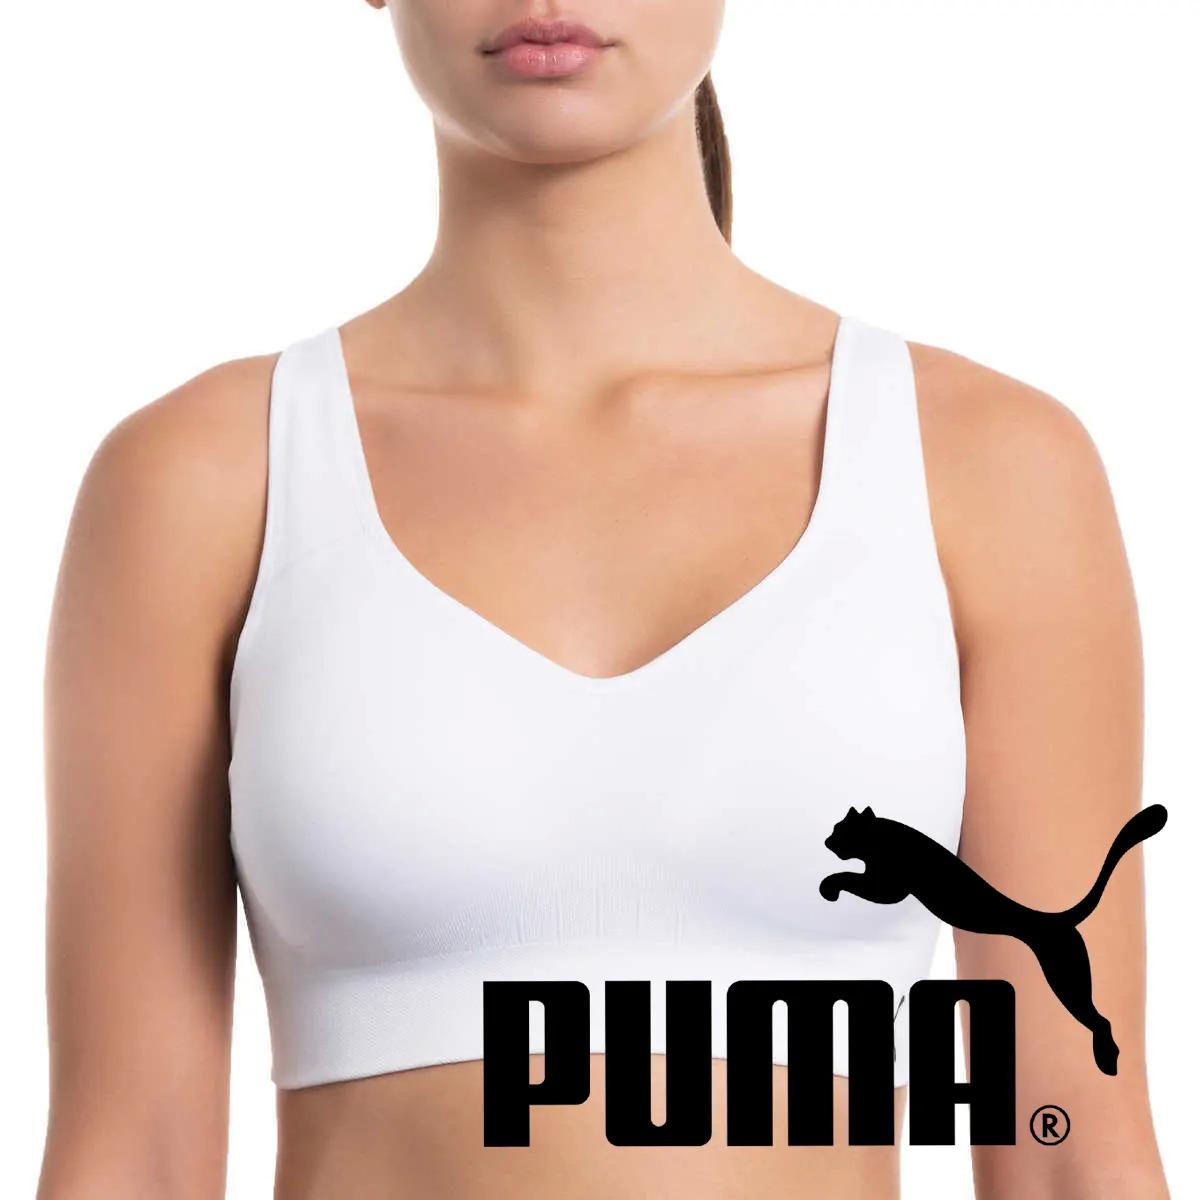 Puma Friends and Family Sale 40% Off